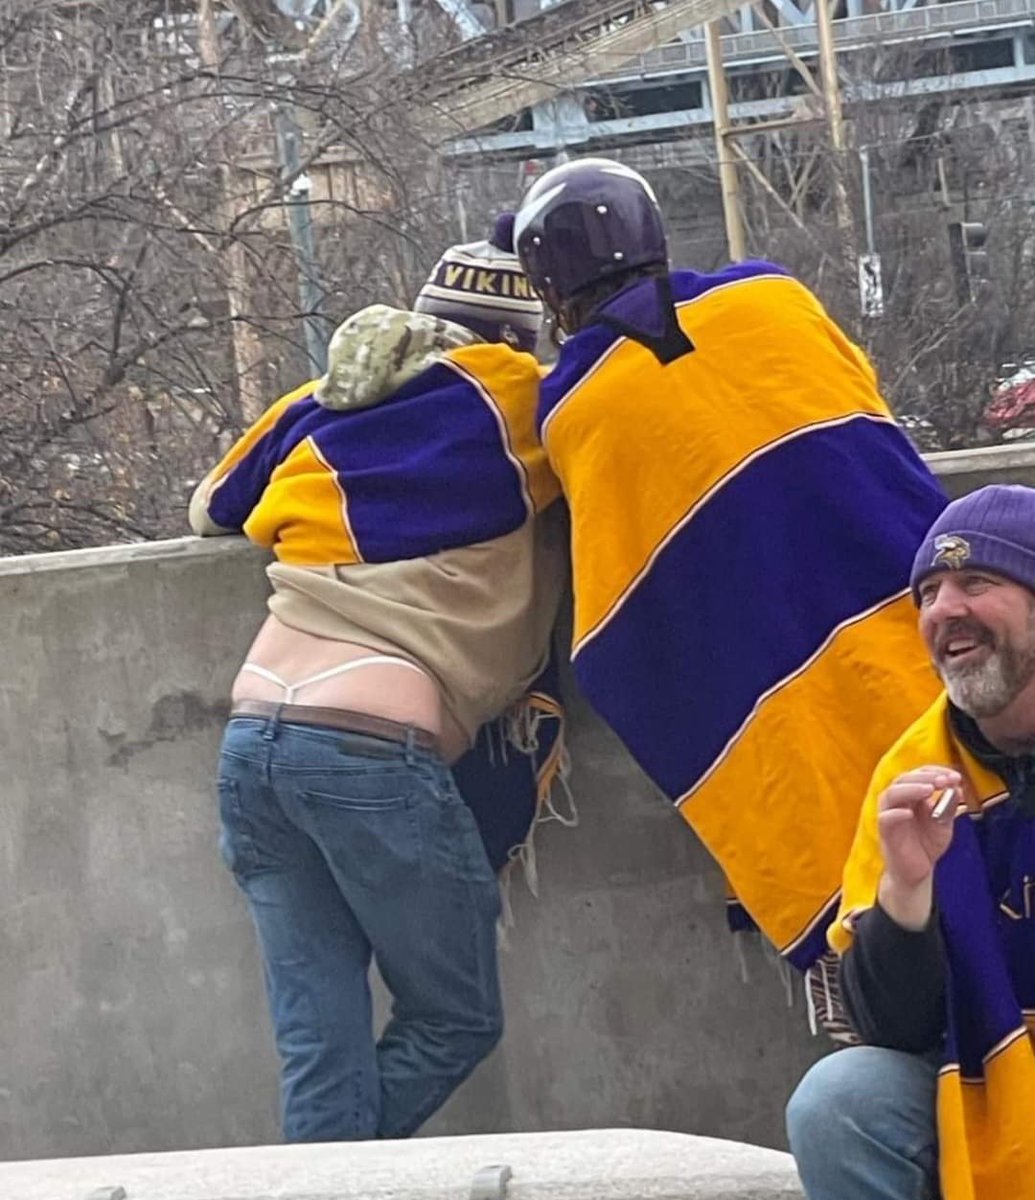 It's crazy that this isn't even the most embarrassing thing that happened for Vikings fans in Cincinnati last season. Still feels like a dream.